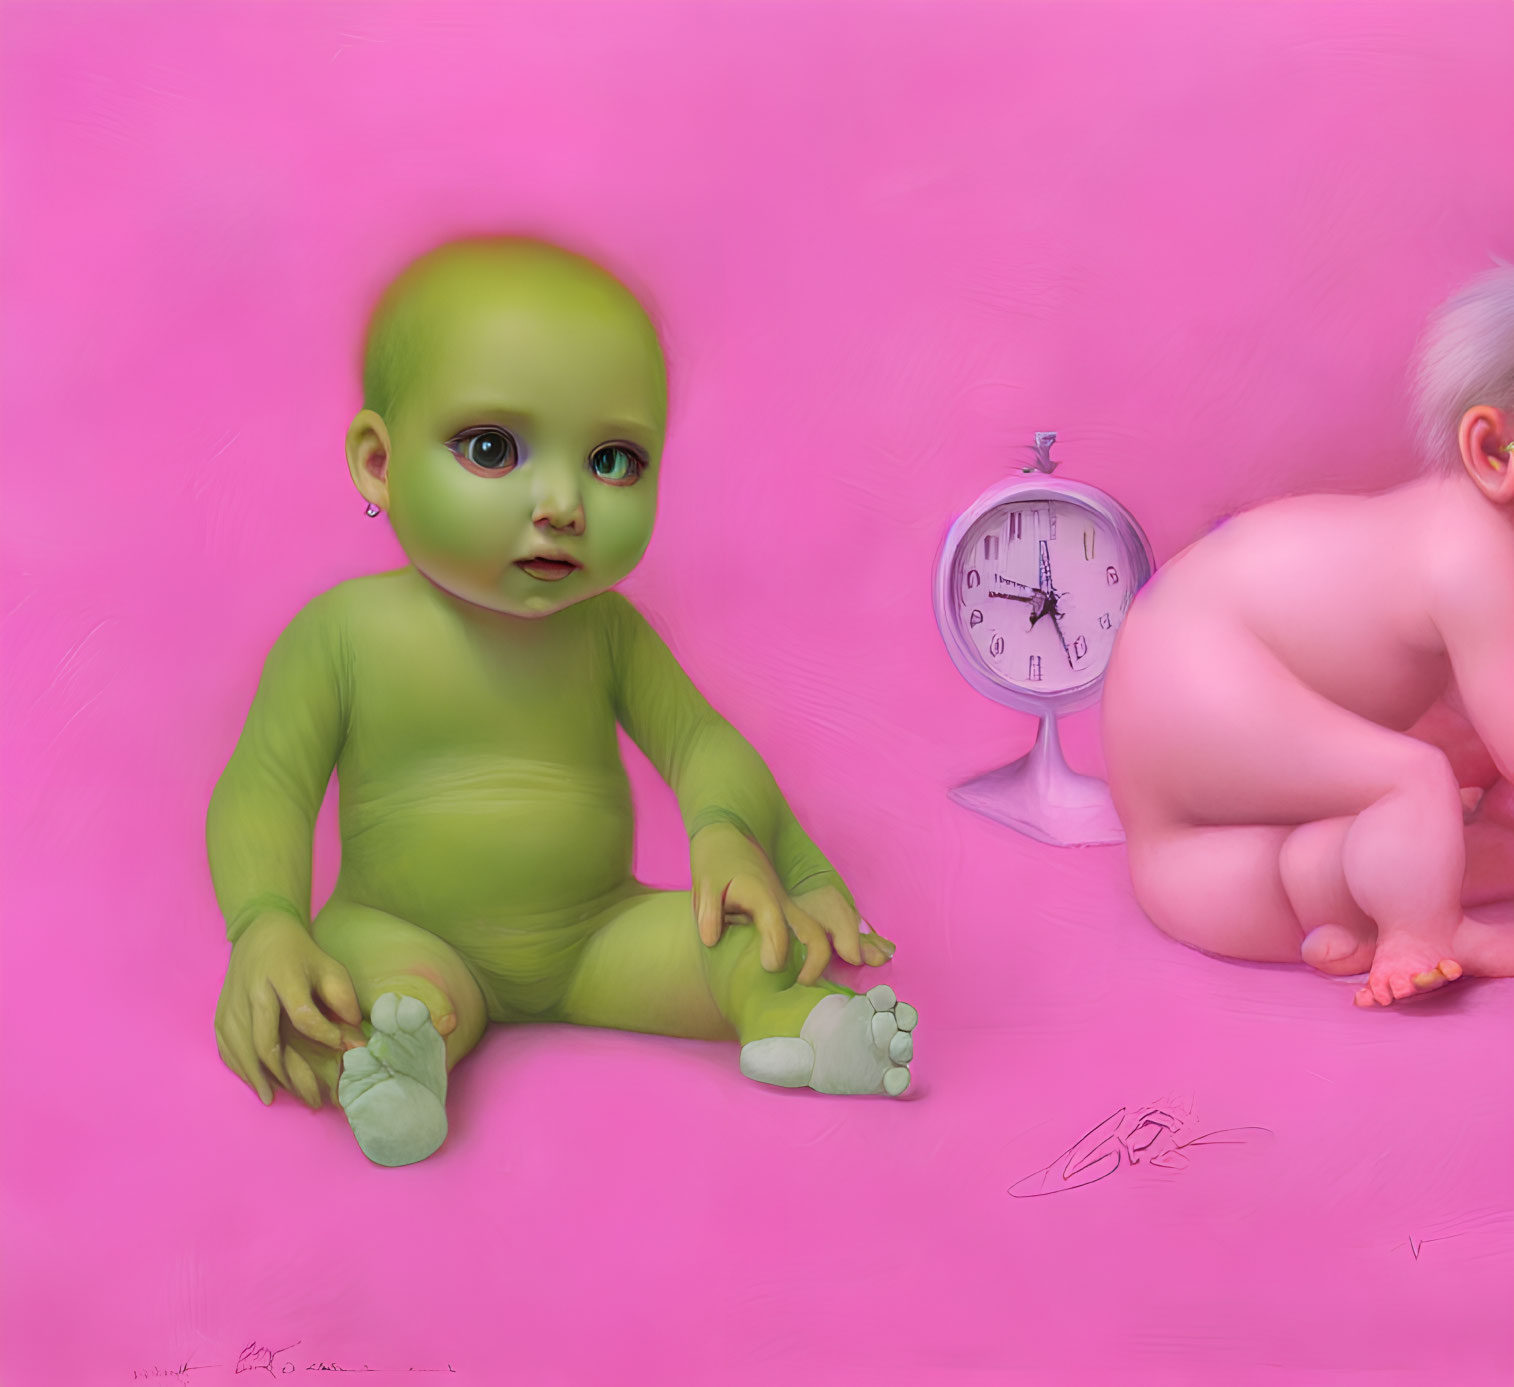 Surreal artwork featuring two babies with unique skin tones and an alarm clock on a pink background.